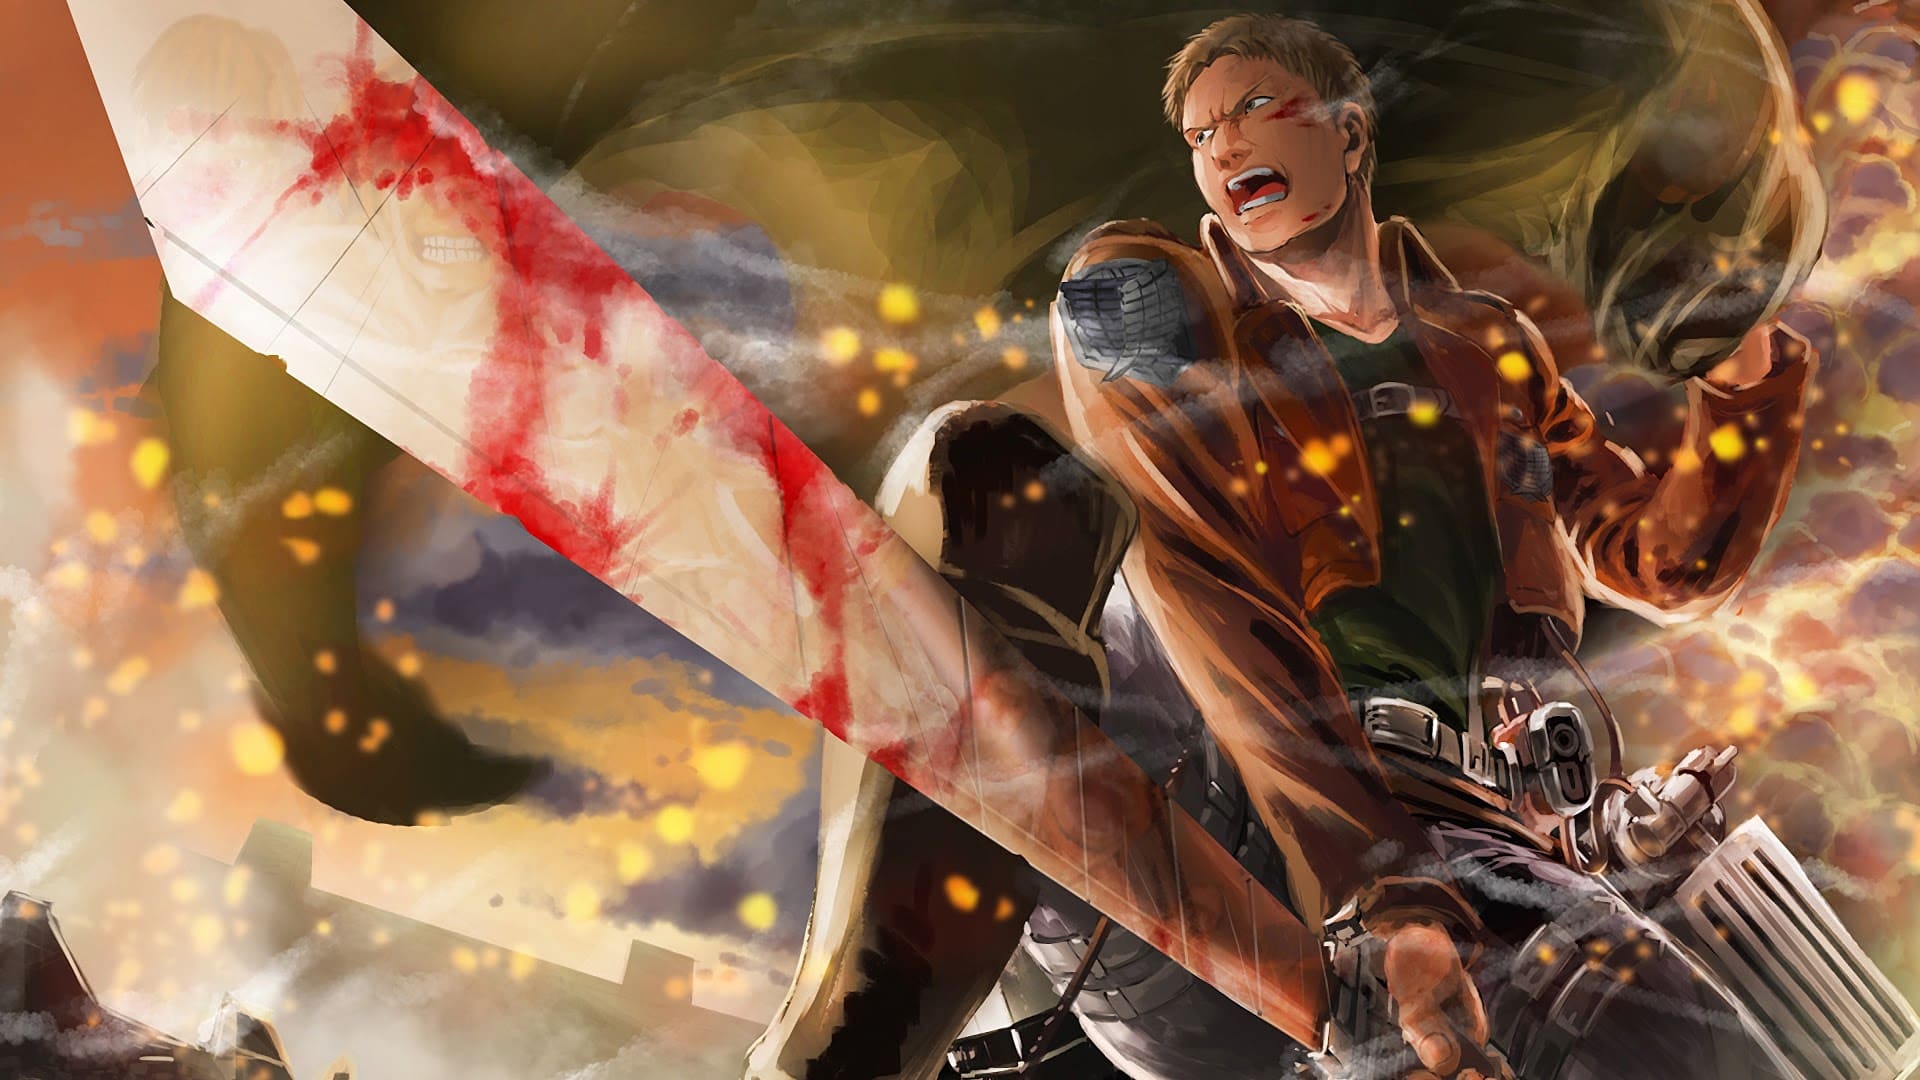 Attack on Titan Wallpapers - Top 65 Best Attack on Titan Backgrounds  Download